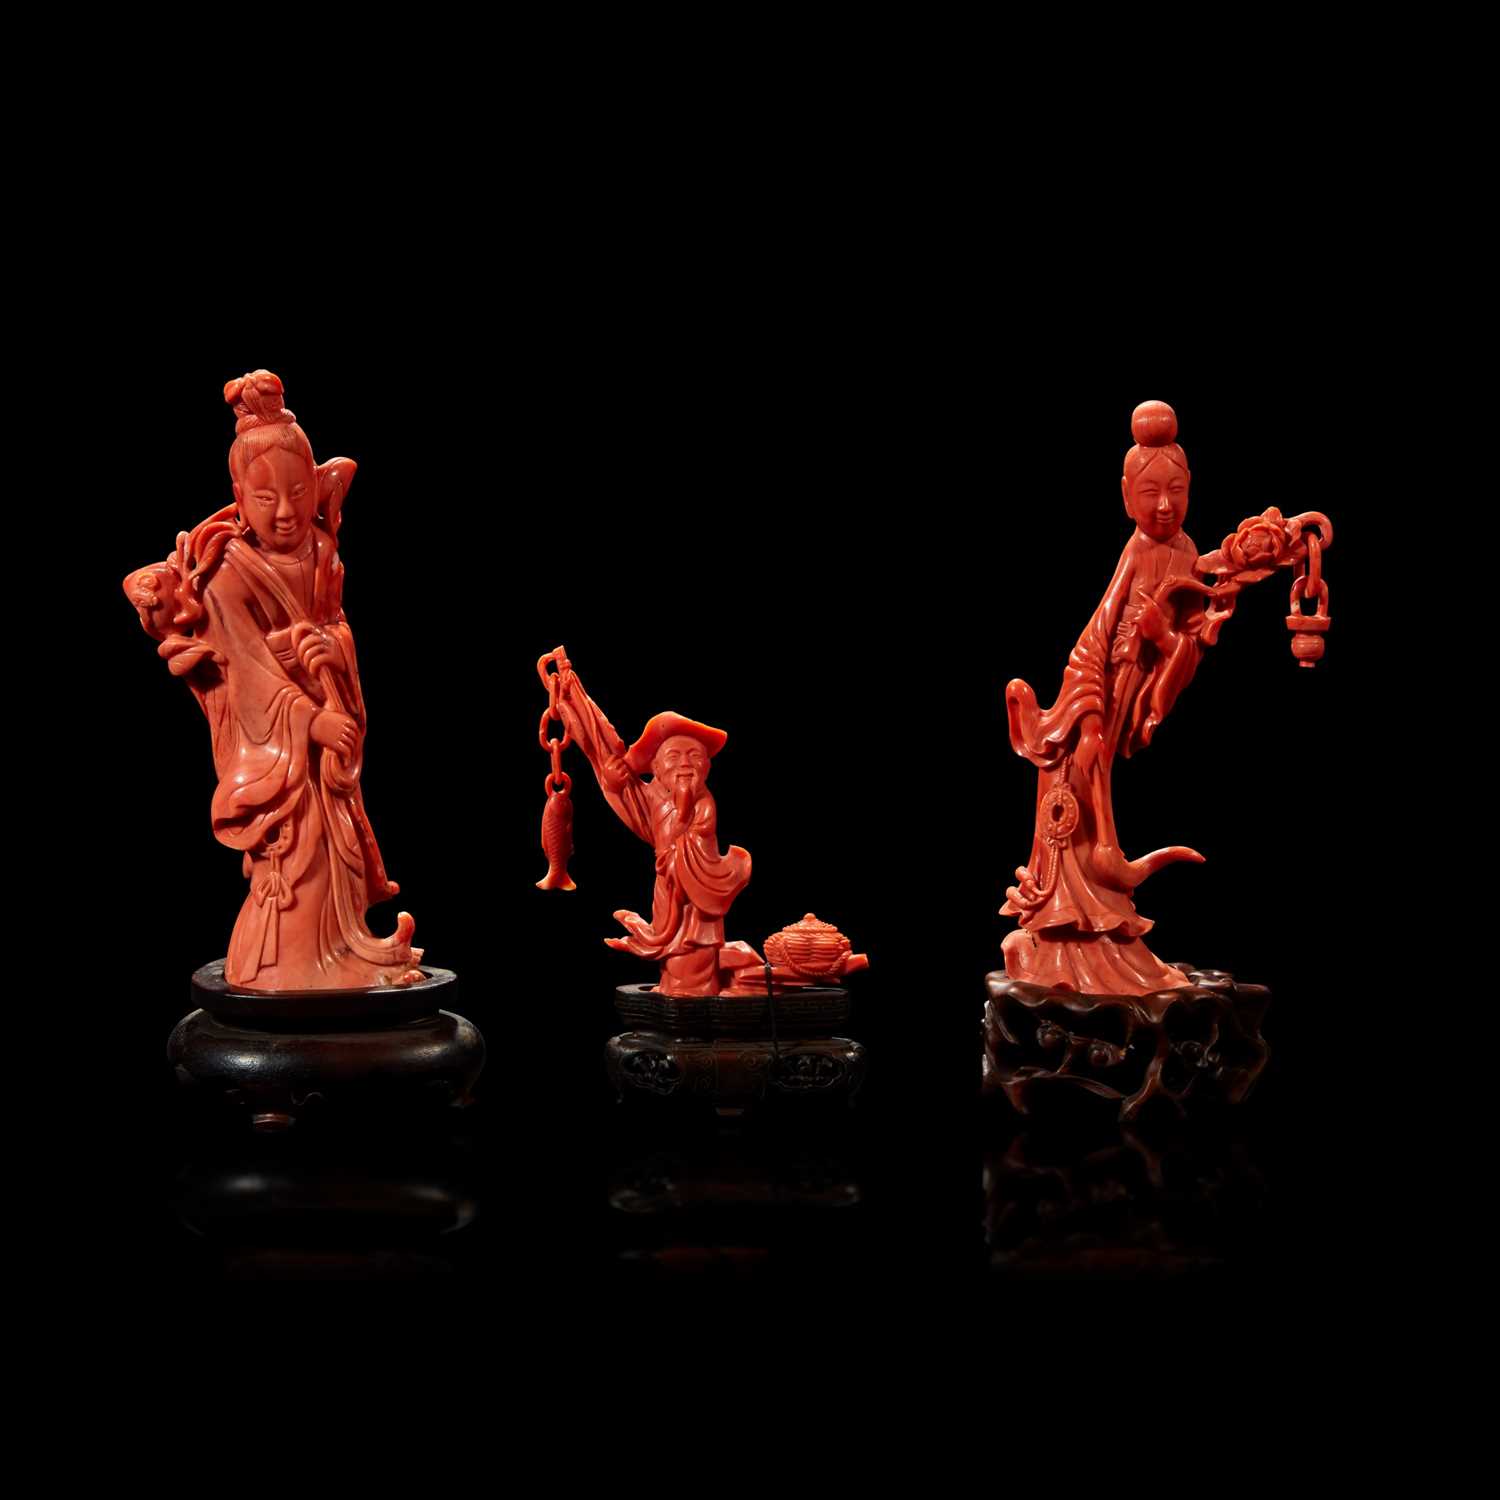 Lot 99 - Three Chinese carved coral figural groups, meiren and peach, man and basket, meiren and flower